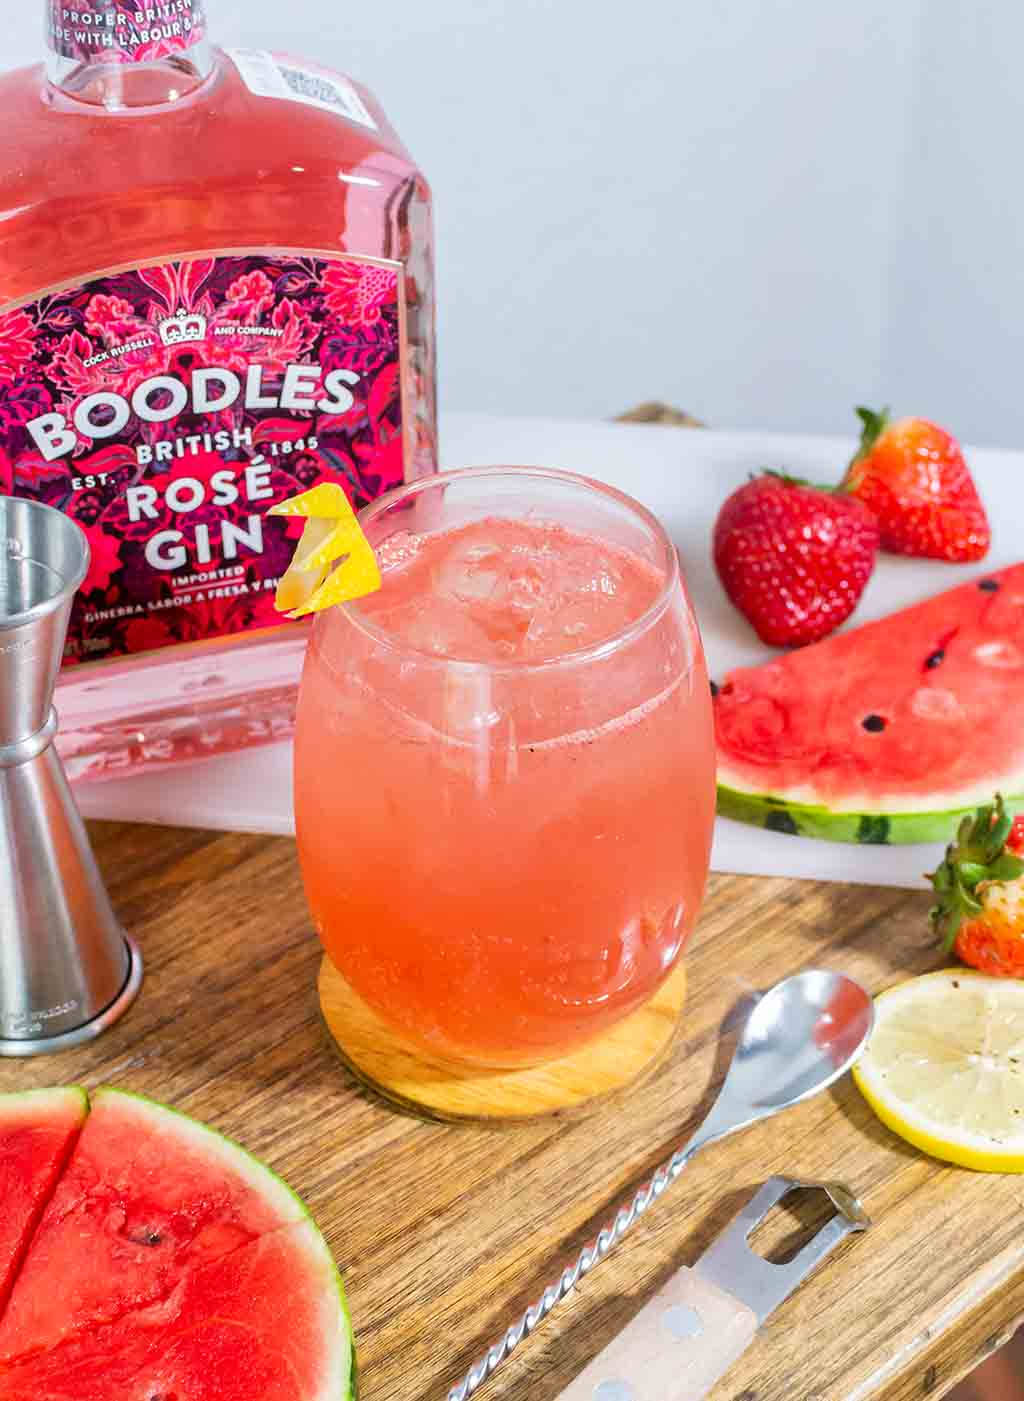 Boodles Rose Gin-based Cocktail Wallpaper